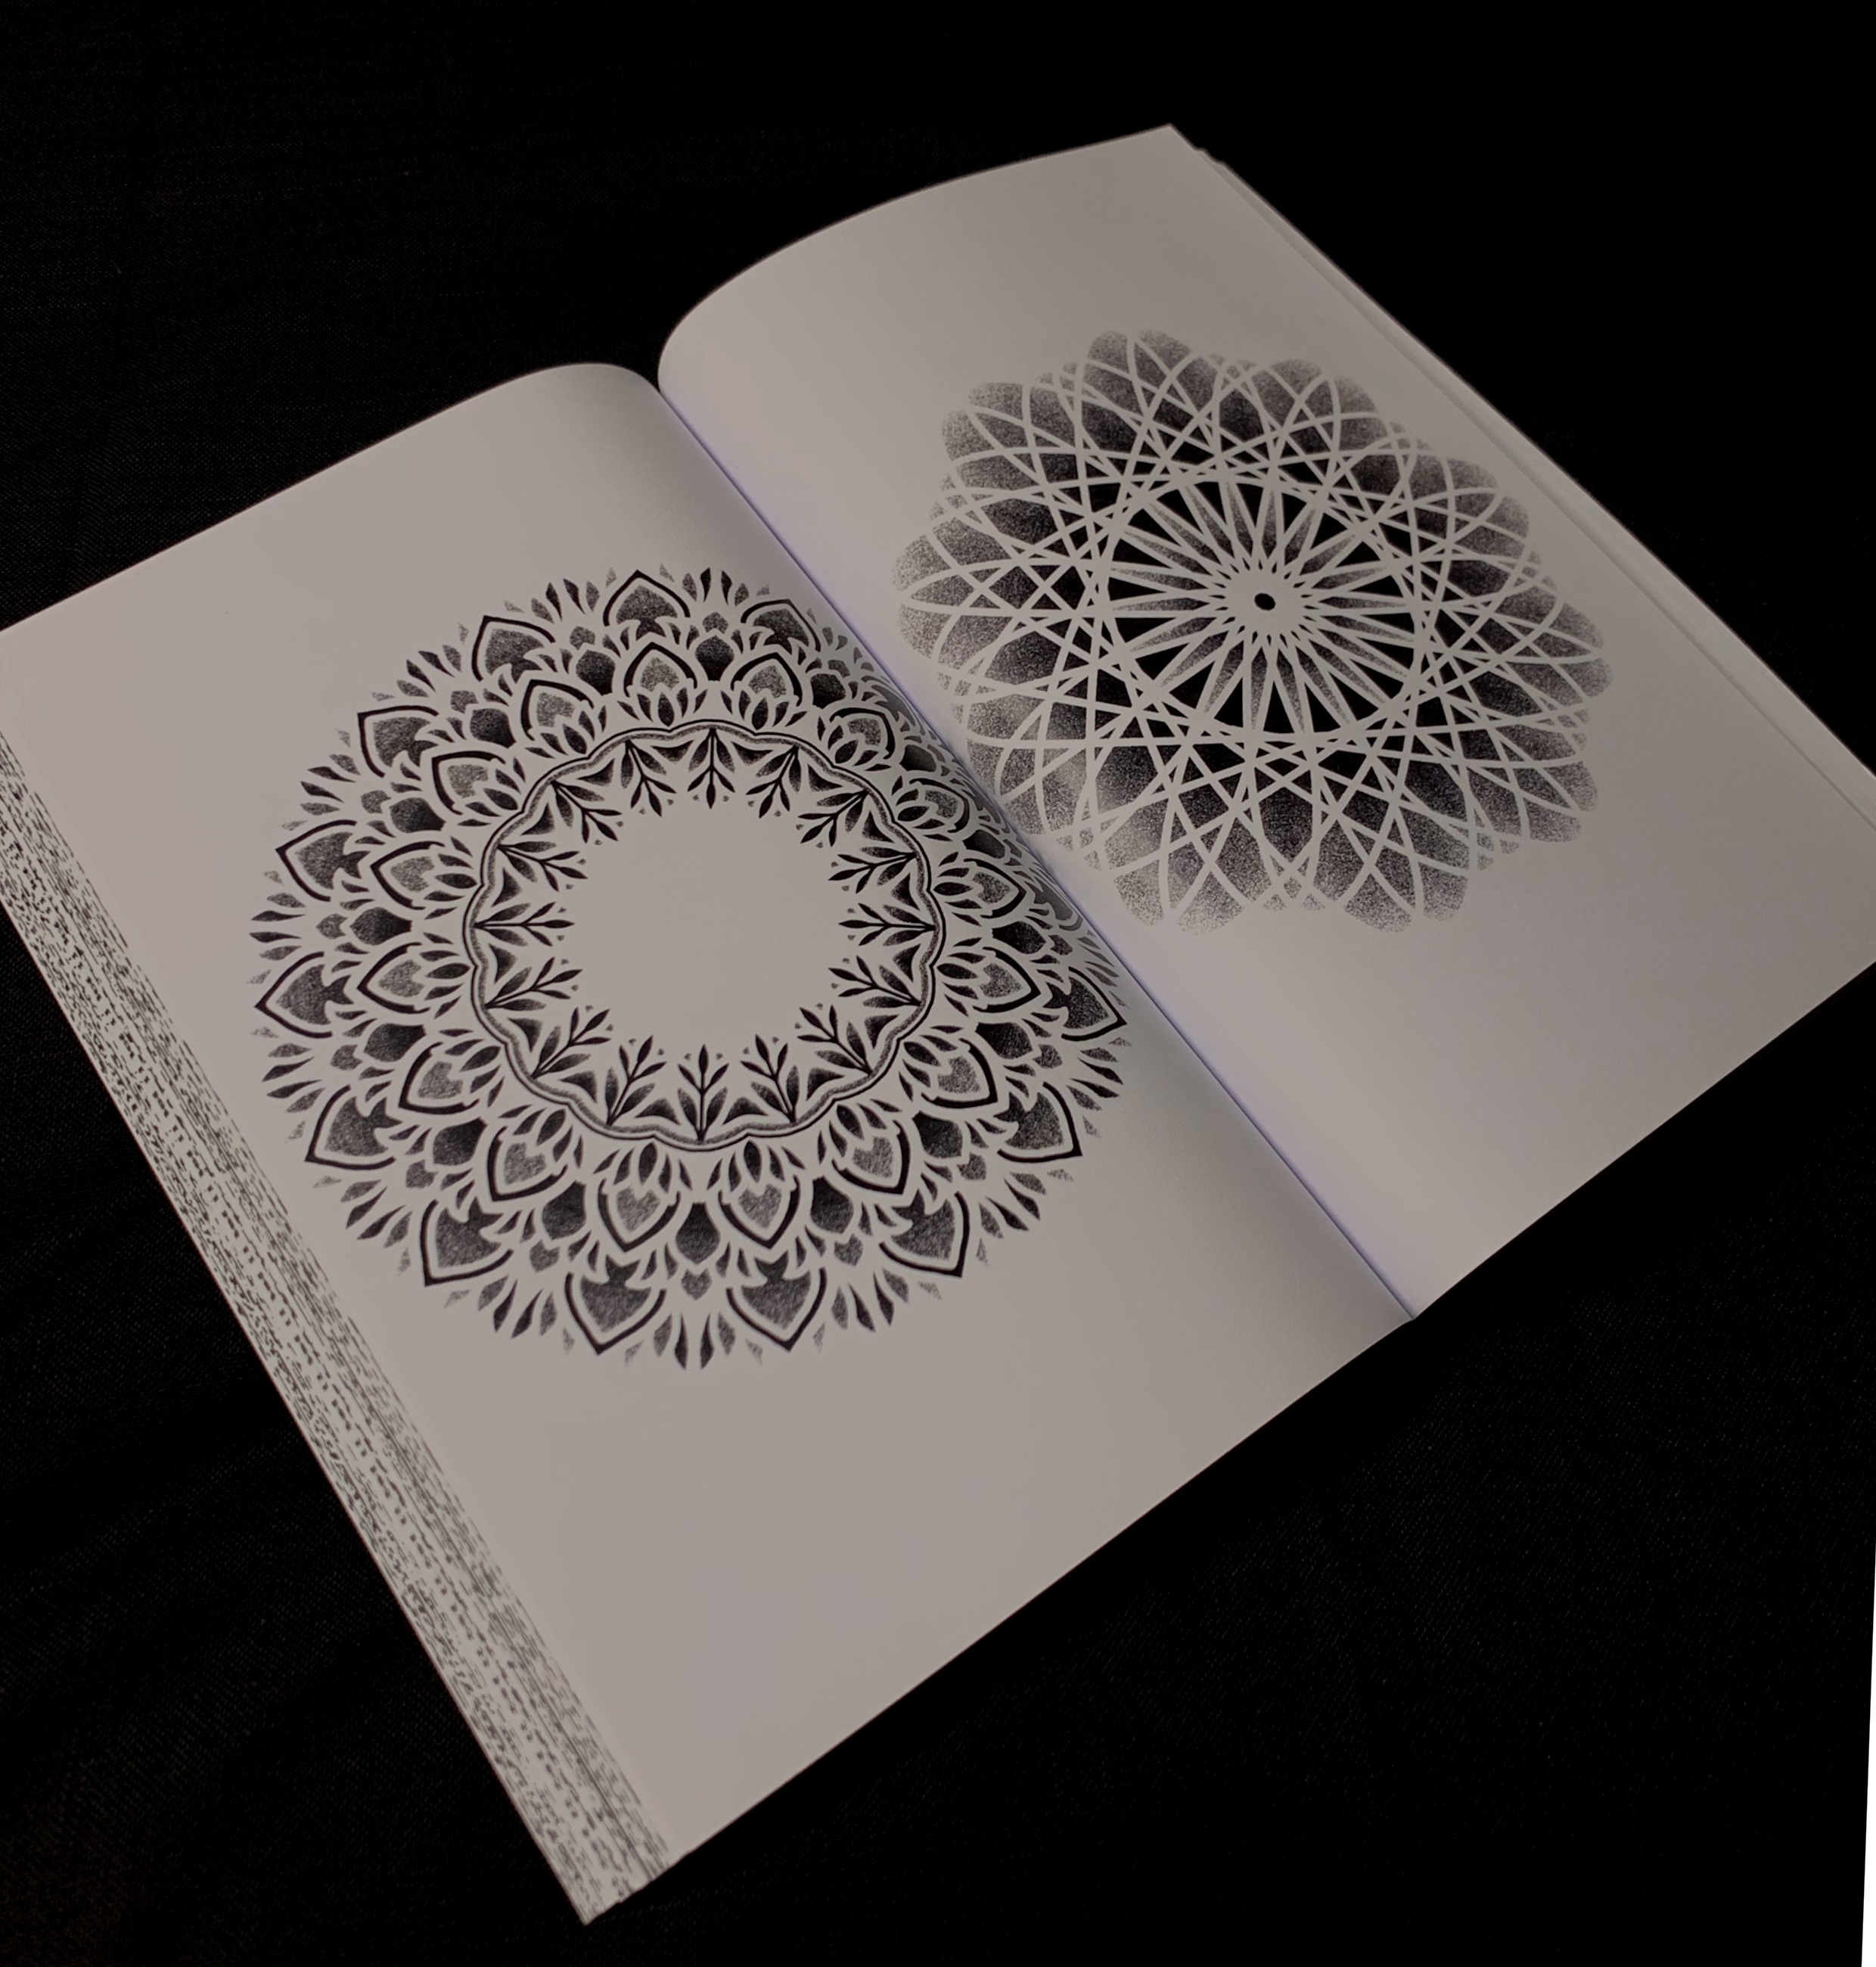 Patterns from United in Isolation book by Tamara Lee